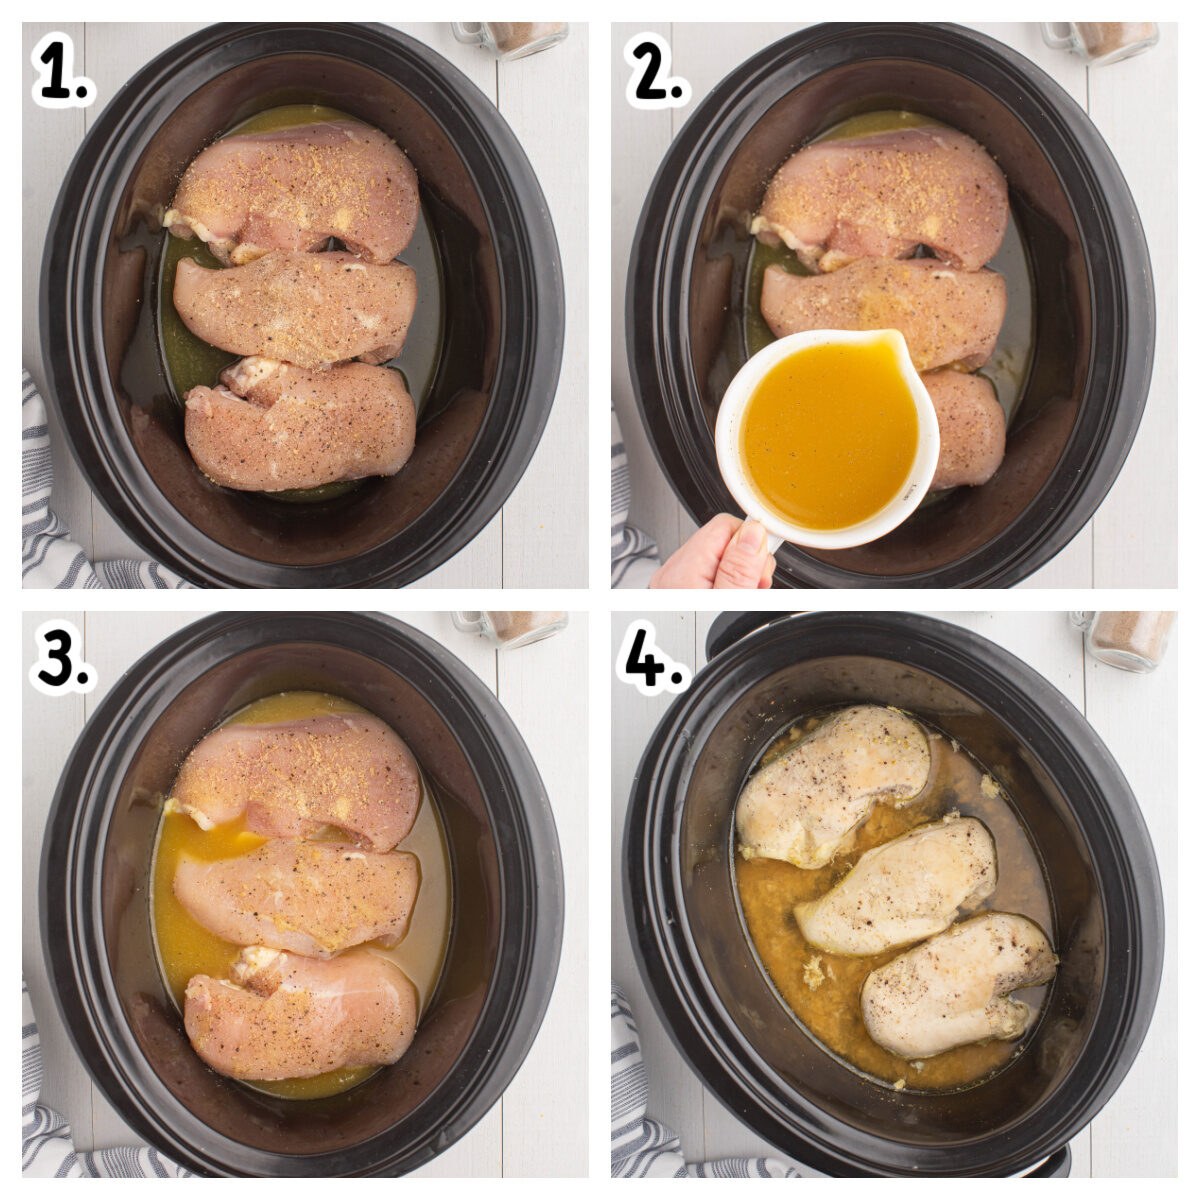 Four images showing how to make chicken breasts in a crockpot.